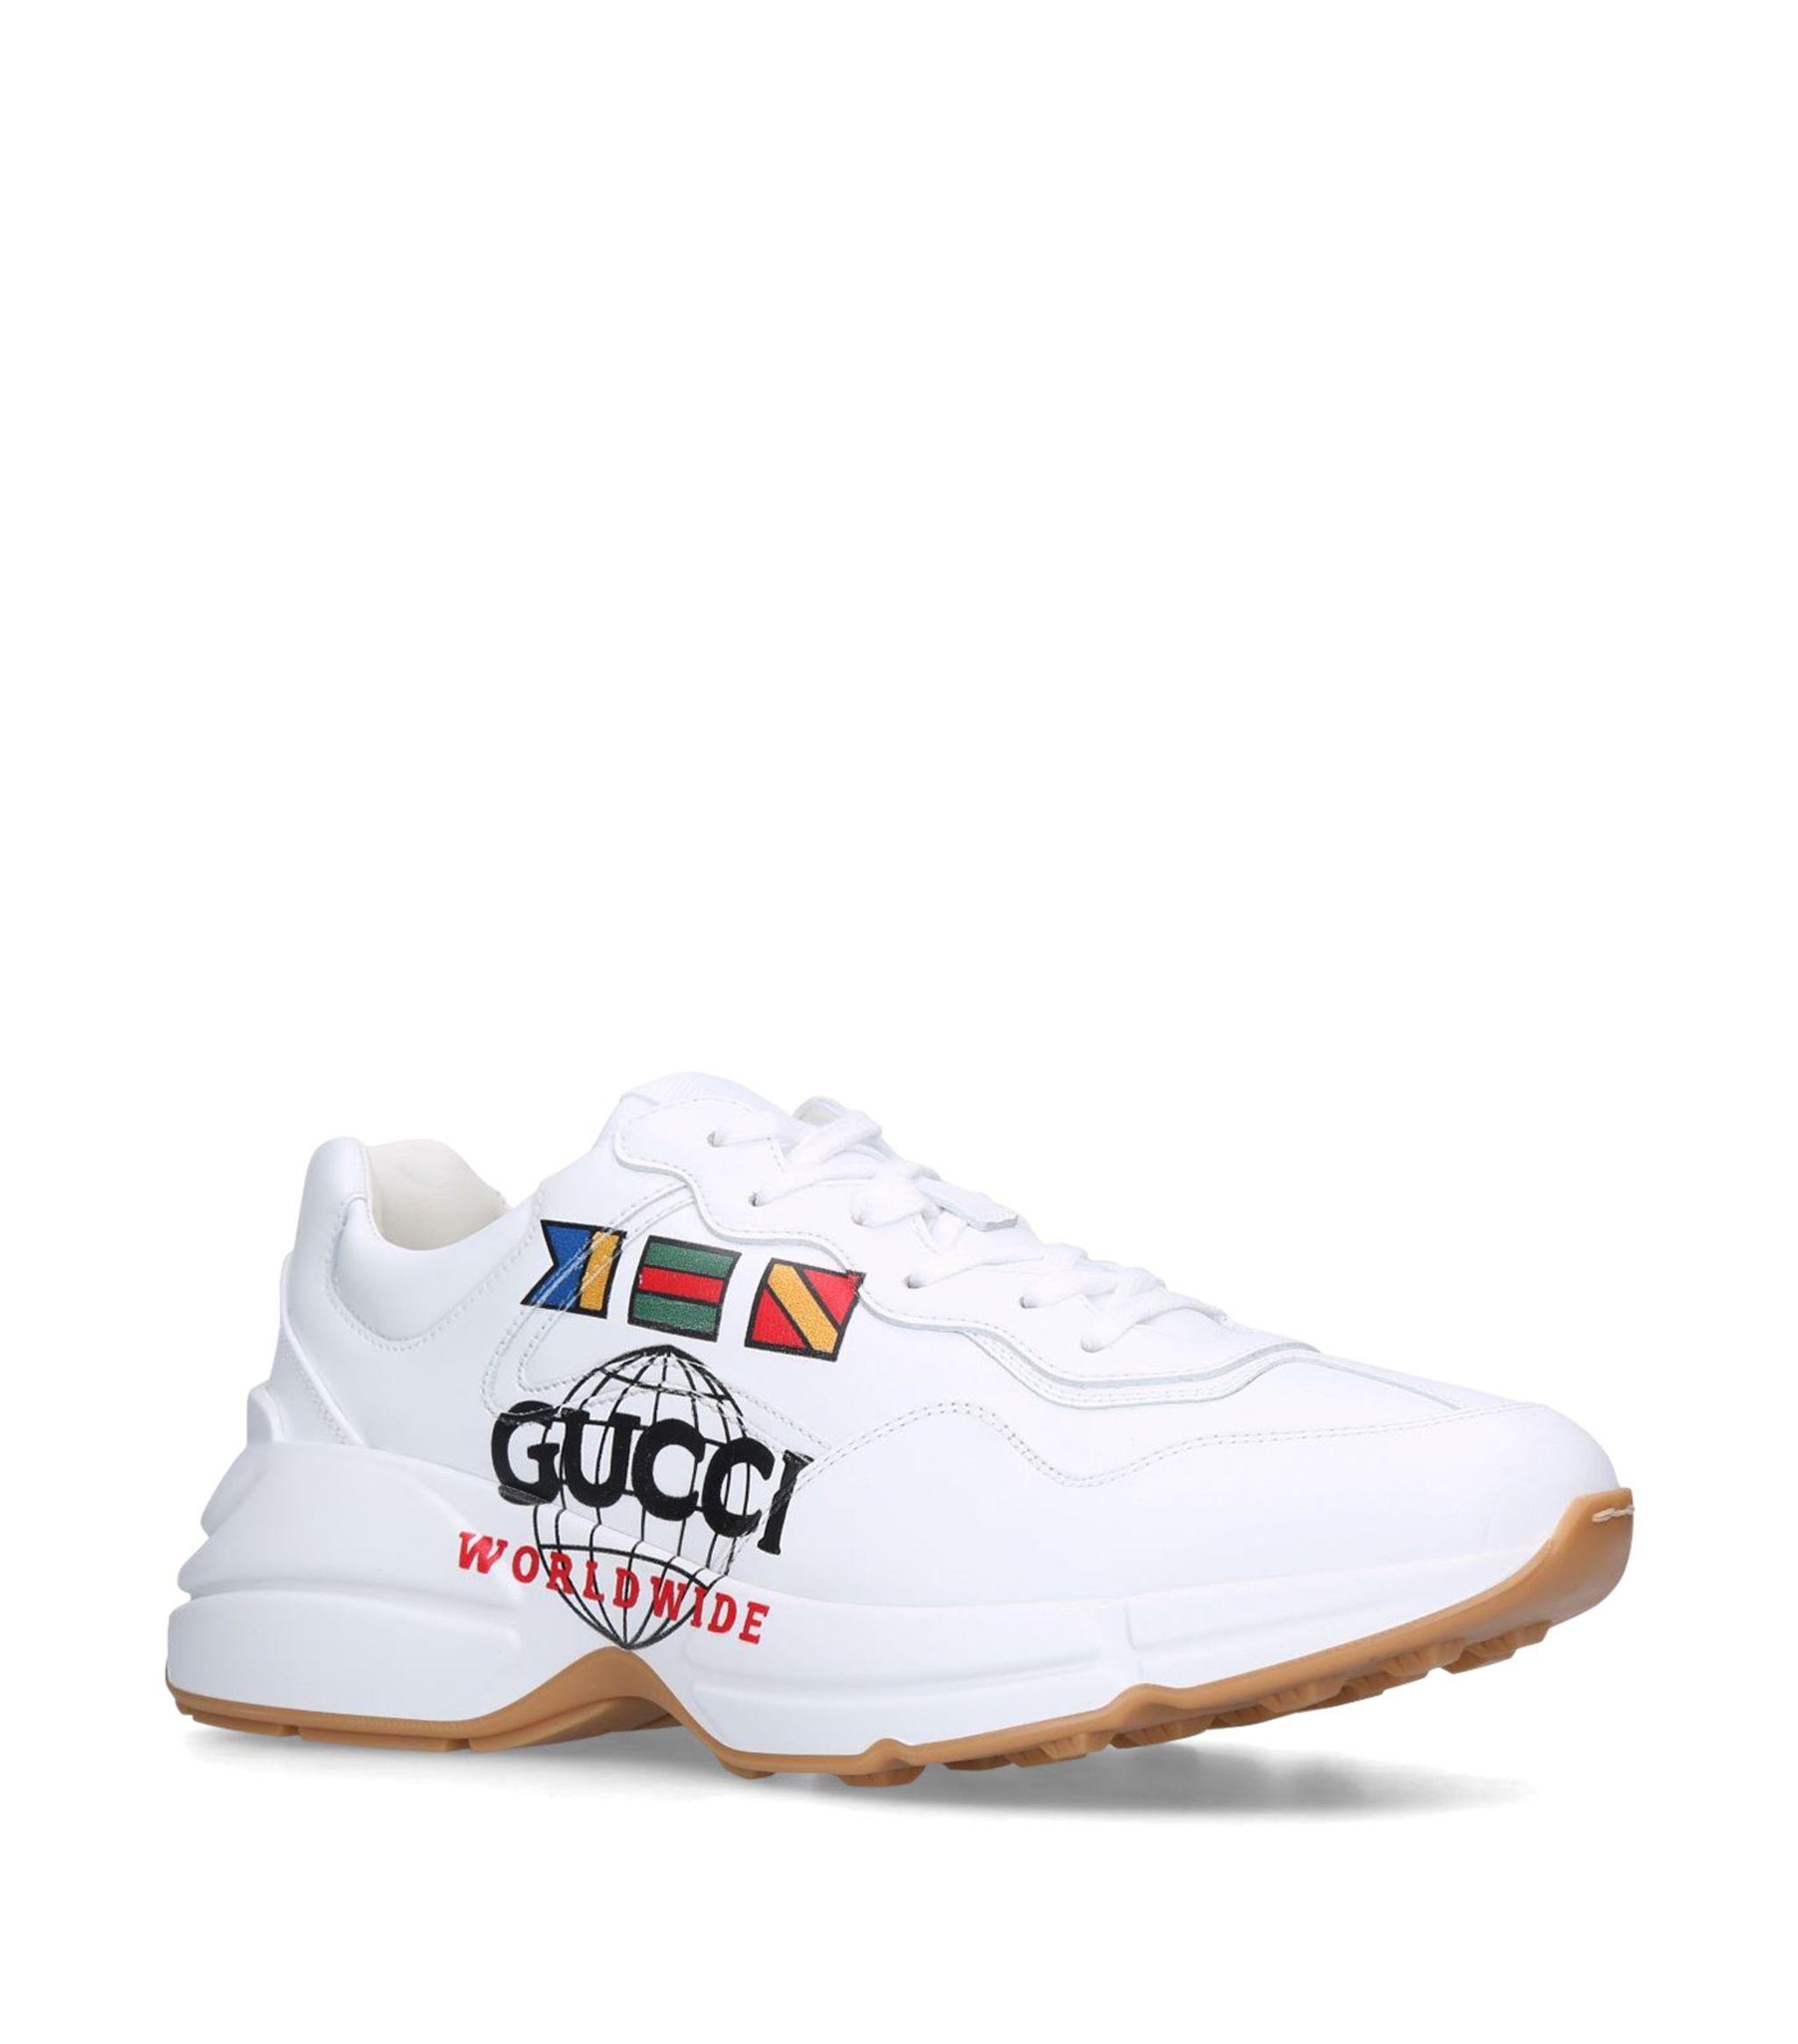 Gucci Rhyton Worldwide Sneakers in White for Men - Save 10% - Lyst